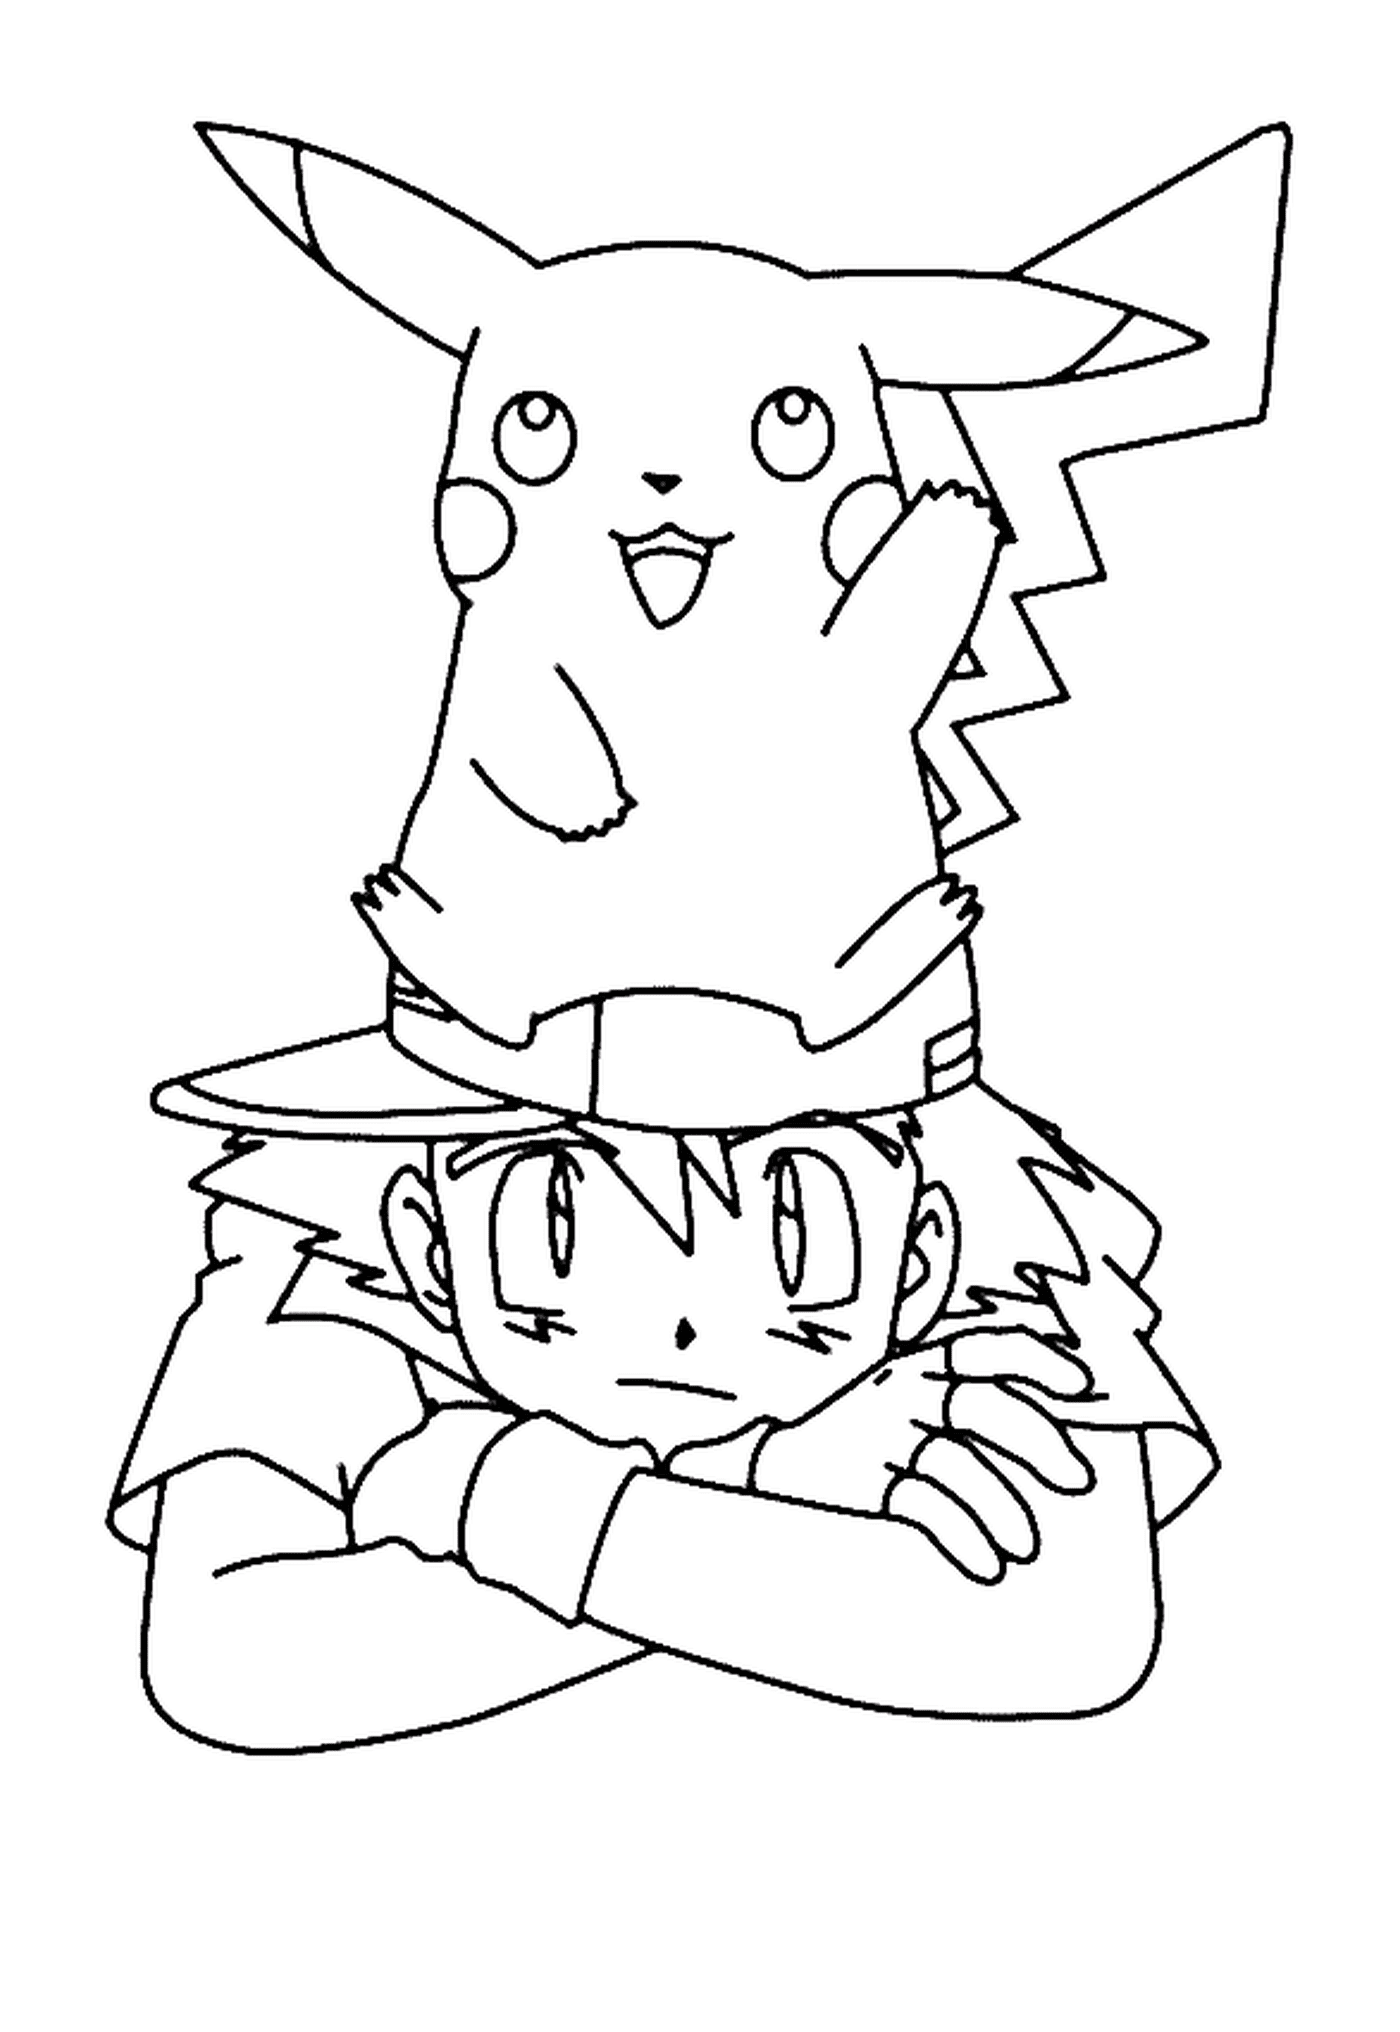  A boy and Pikachu together 